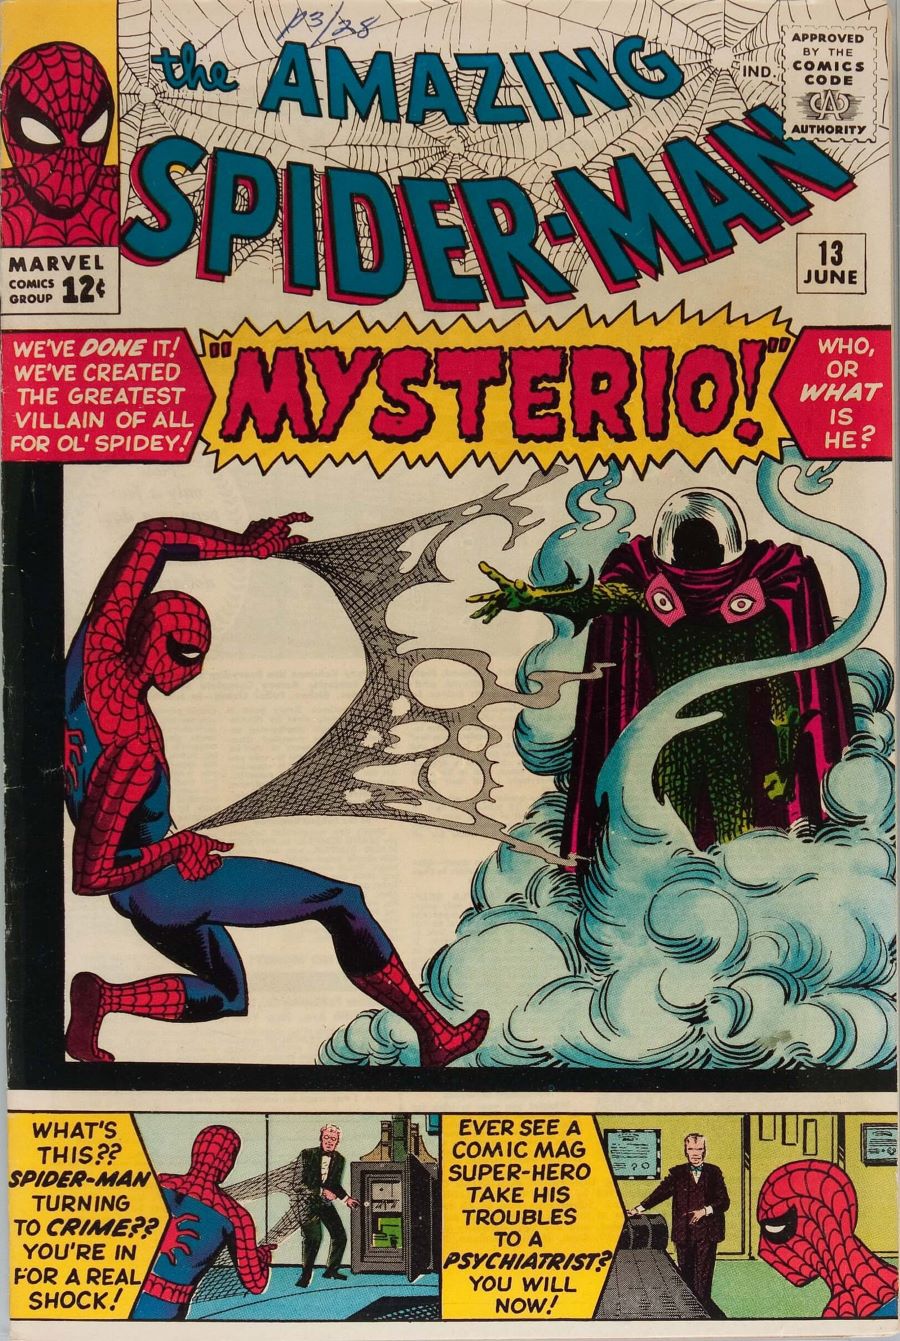 1960s Comic Book Covers